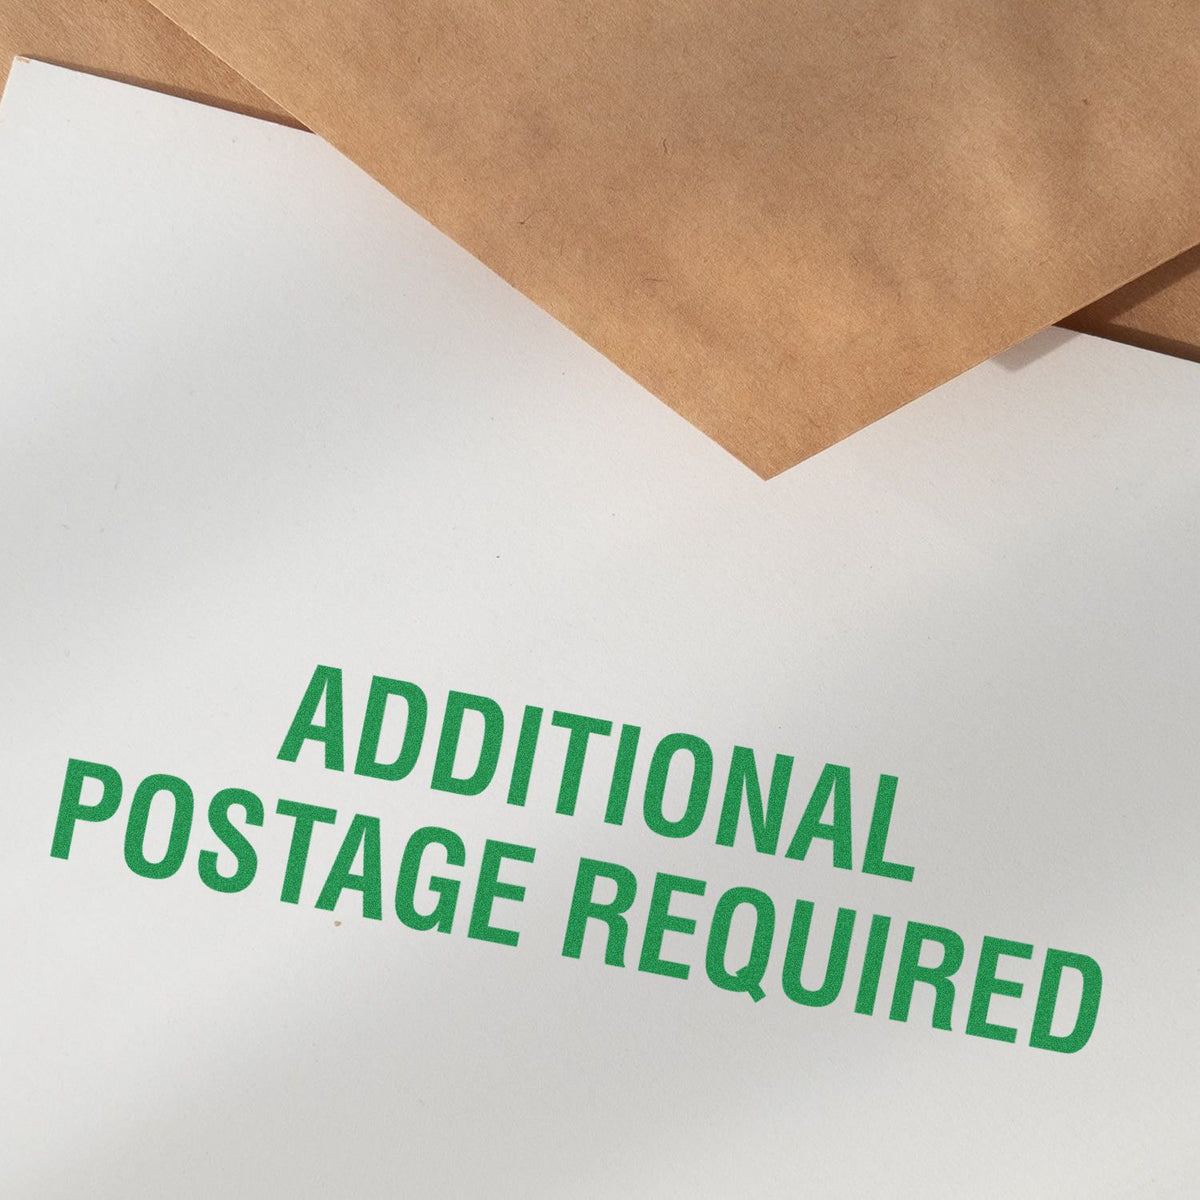 Large Self-Inking Additional Postage Required Stamp In Use